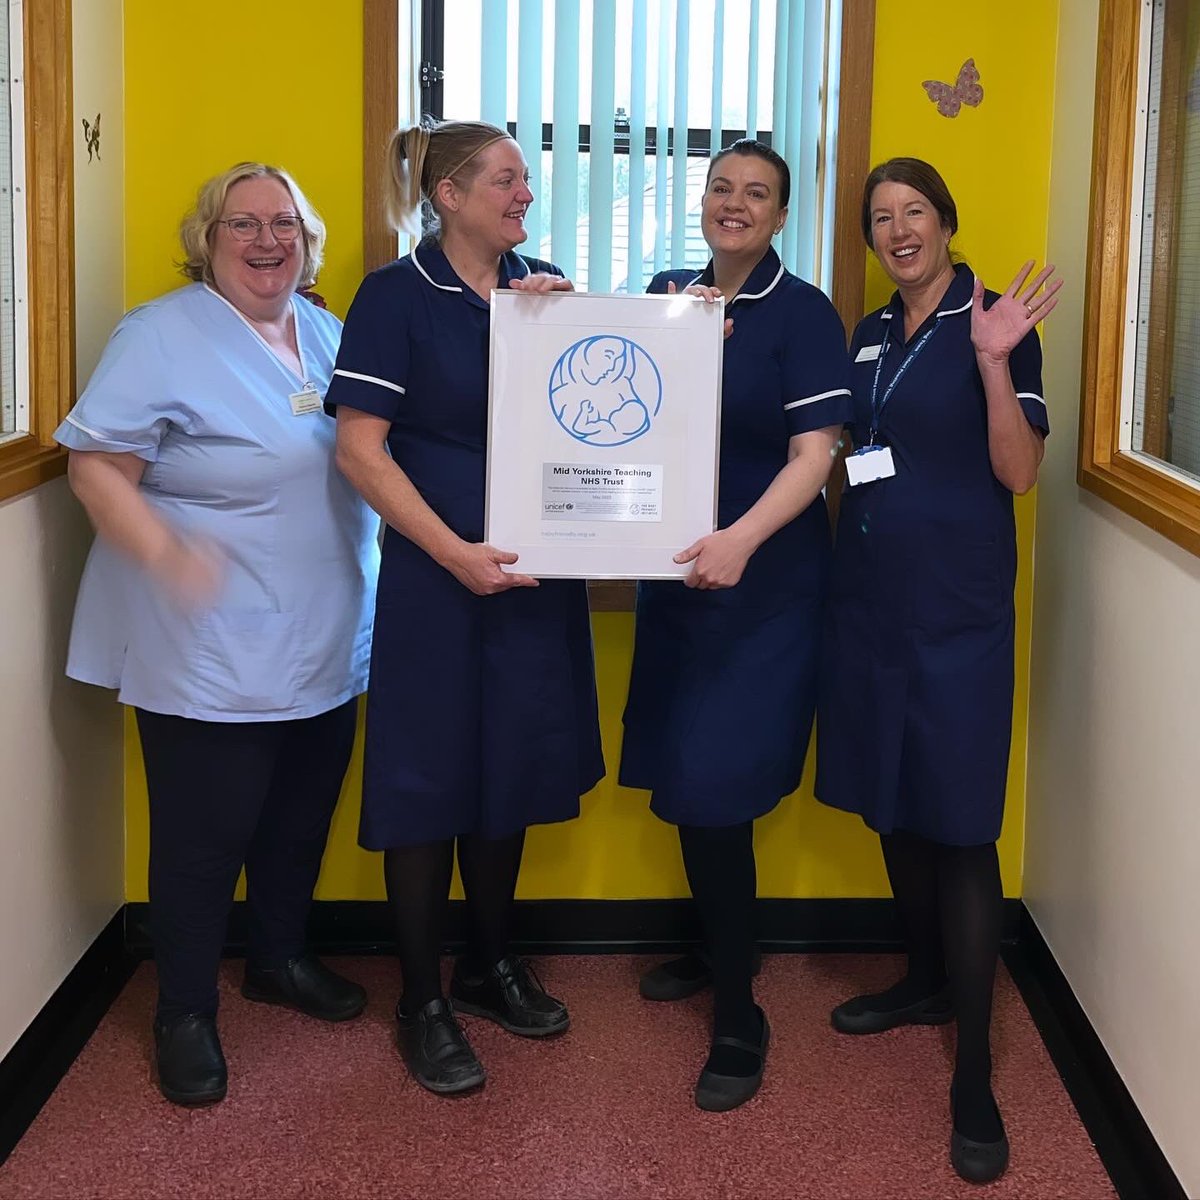 The plaques have arrived 🎉 So thankful for the team I work with and what we achieve, supporting parents and babies #UNICEF #babyfriendly #MYmaterity #MYhospital #infantfeeding